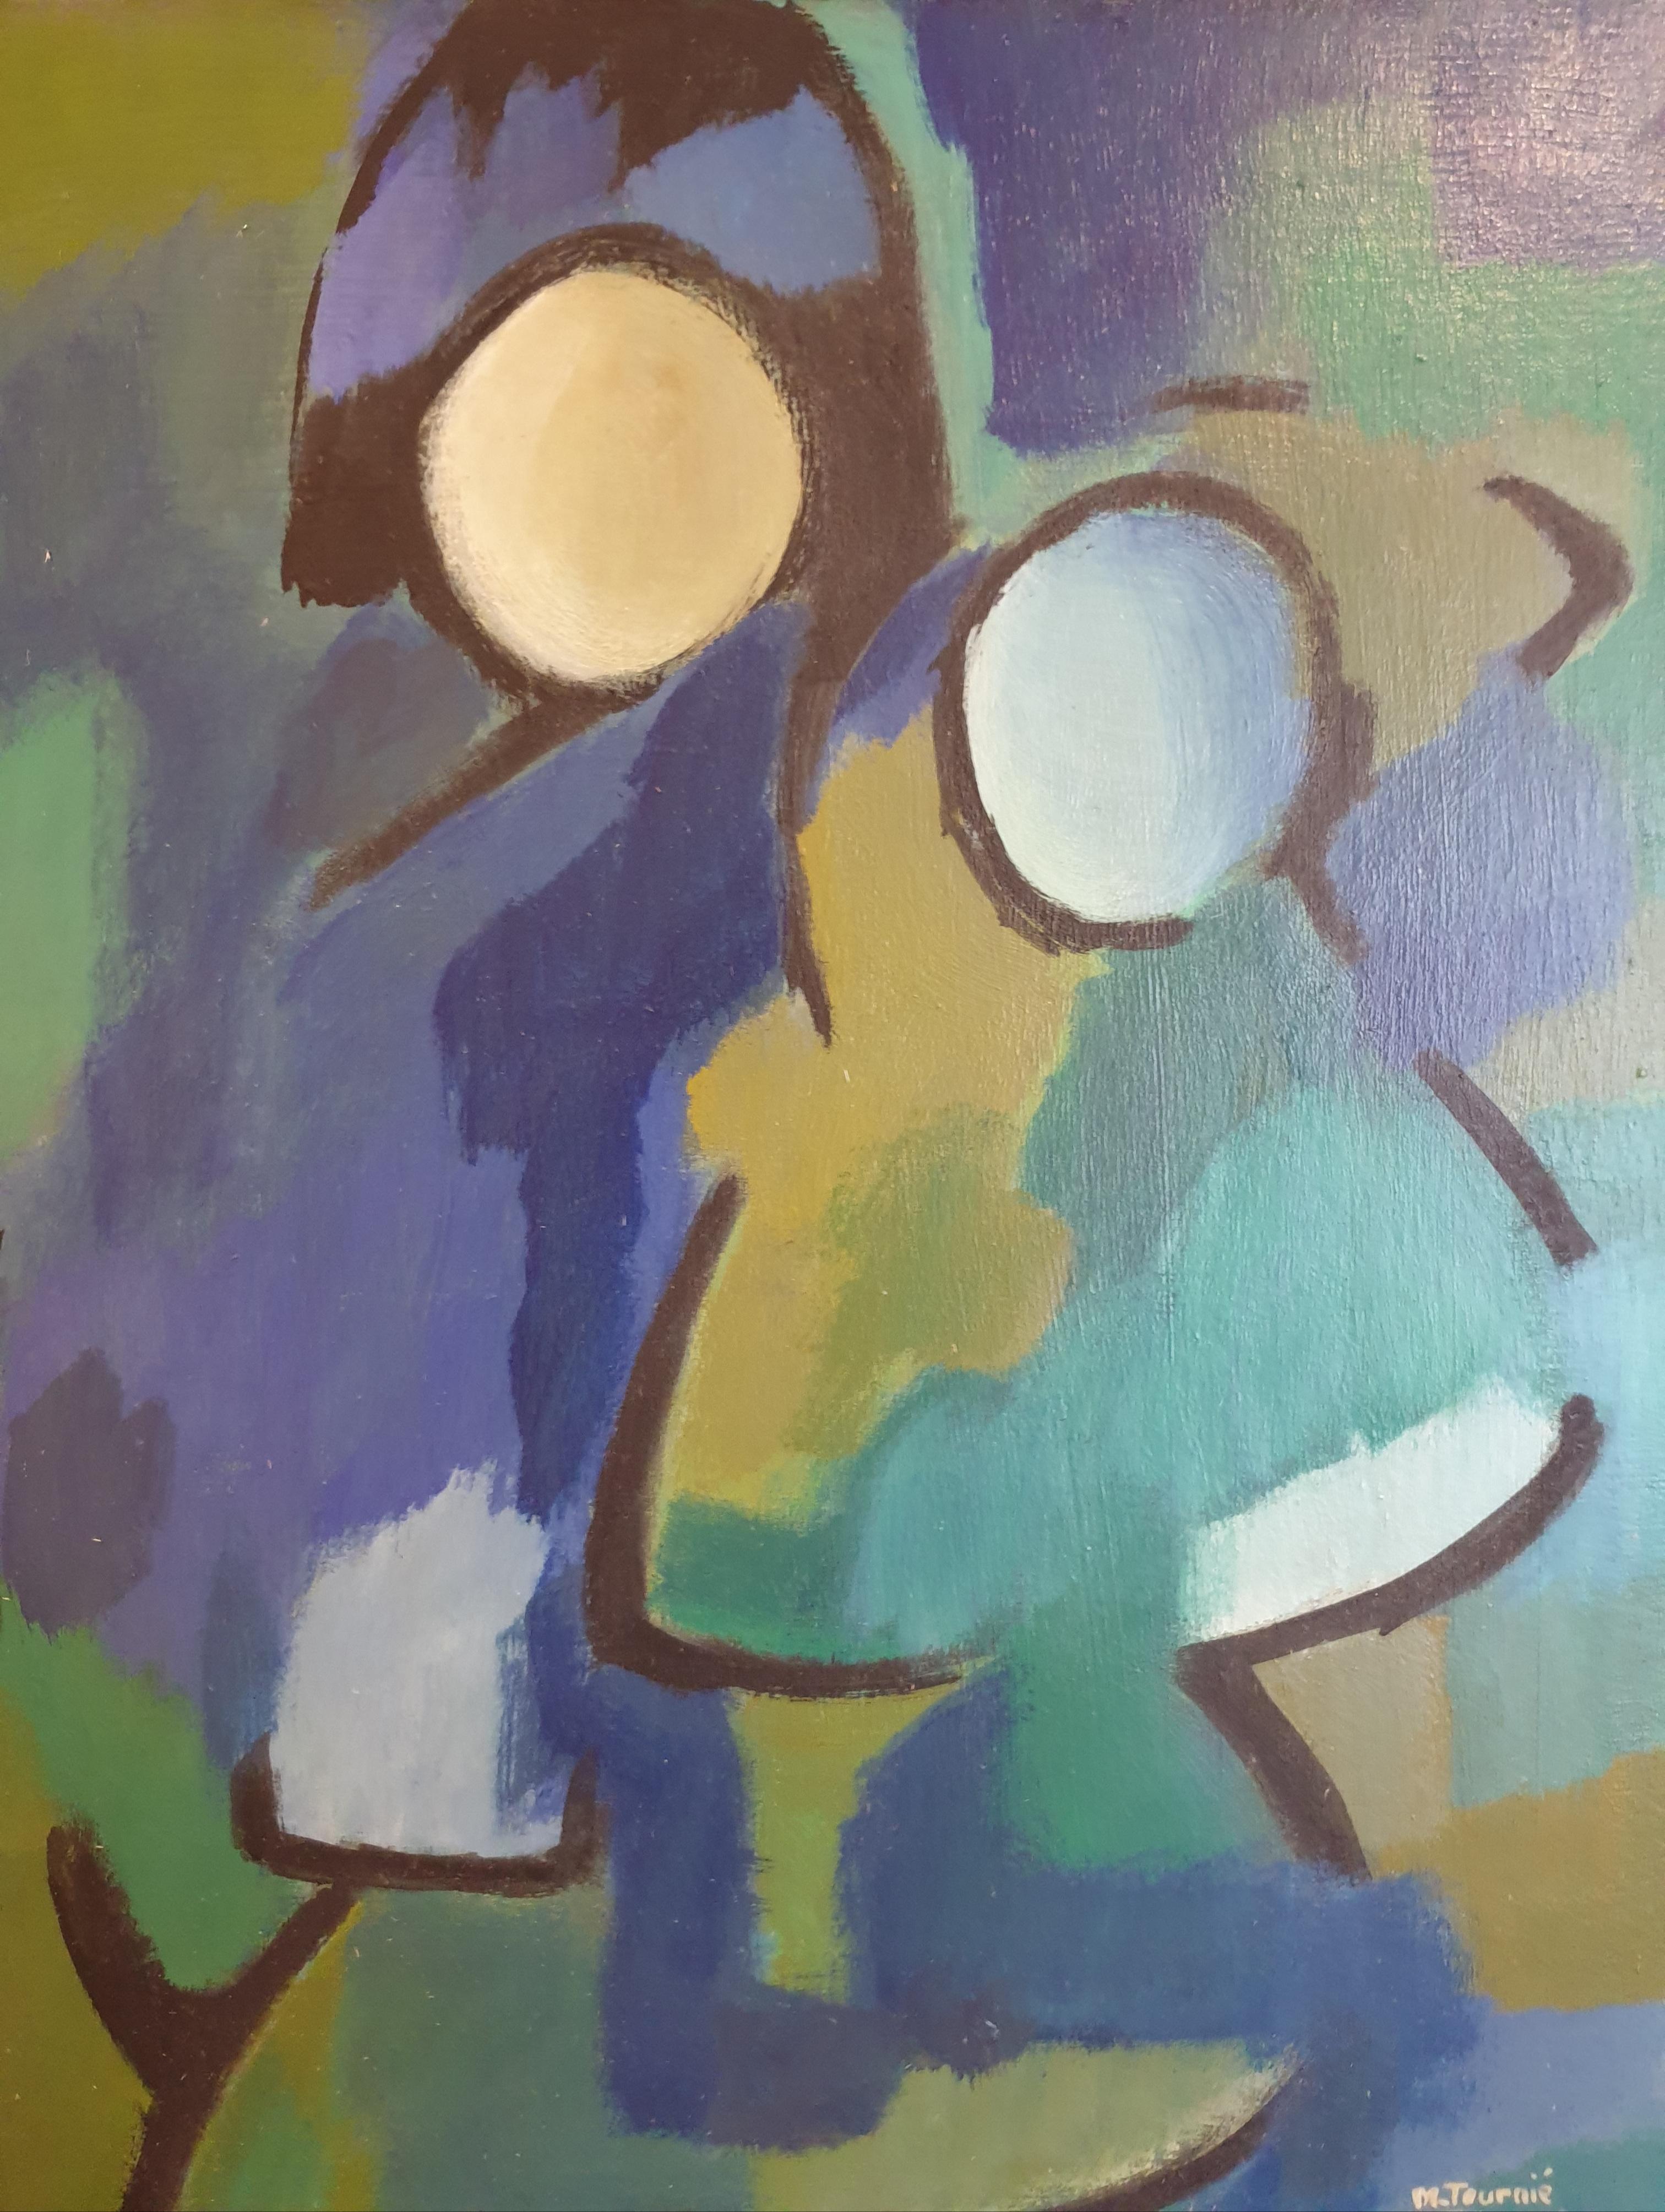 Parent and Child, Mid-Century Abstract Expressionist, Acrylic and Oil on Board. - Gray Abstract Painting by Marcelle Tournié